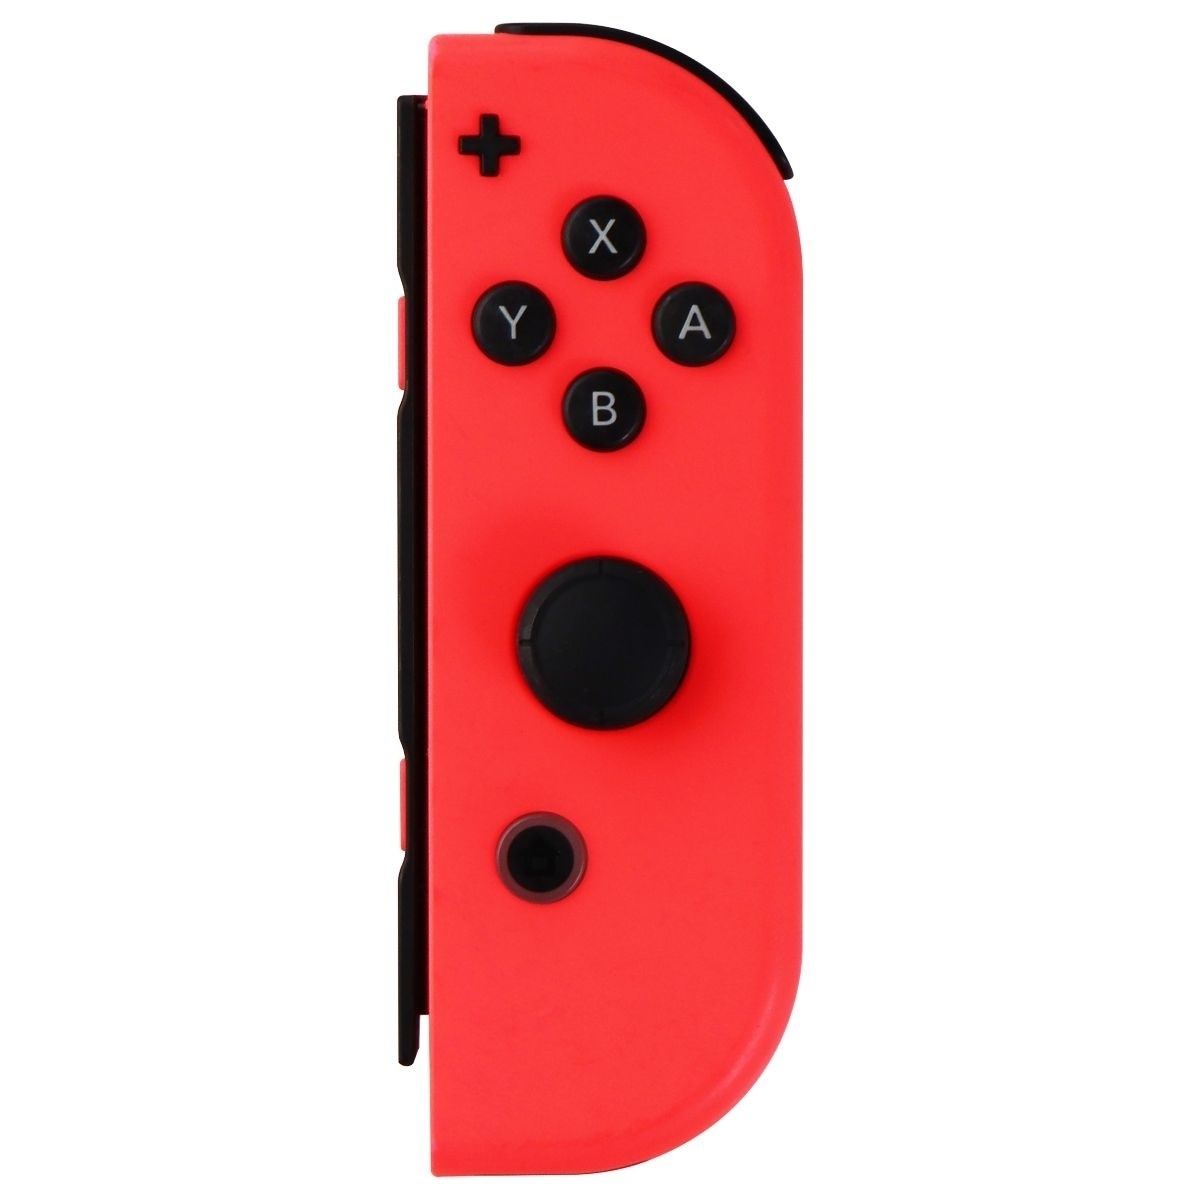 Nintendo JoyCon Controller For Switch Console Right Side ONLY - Neon Red HAC-016